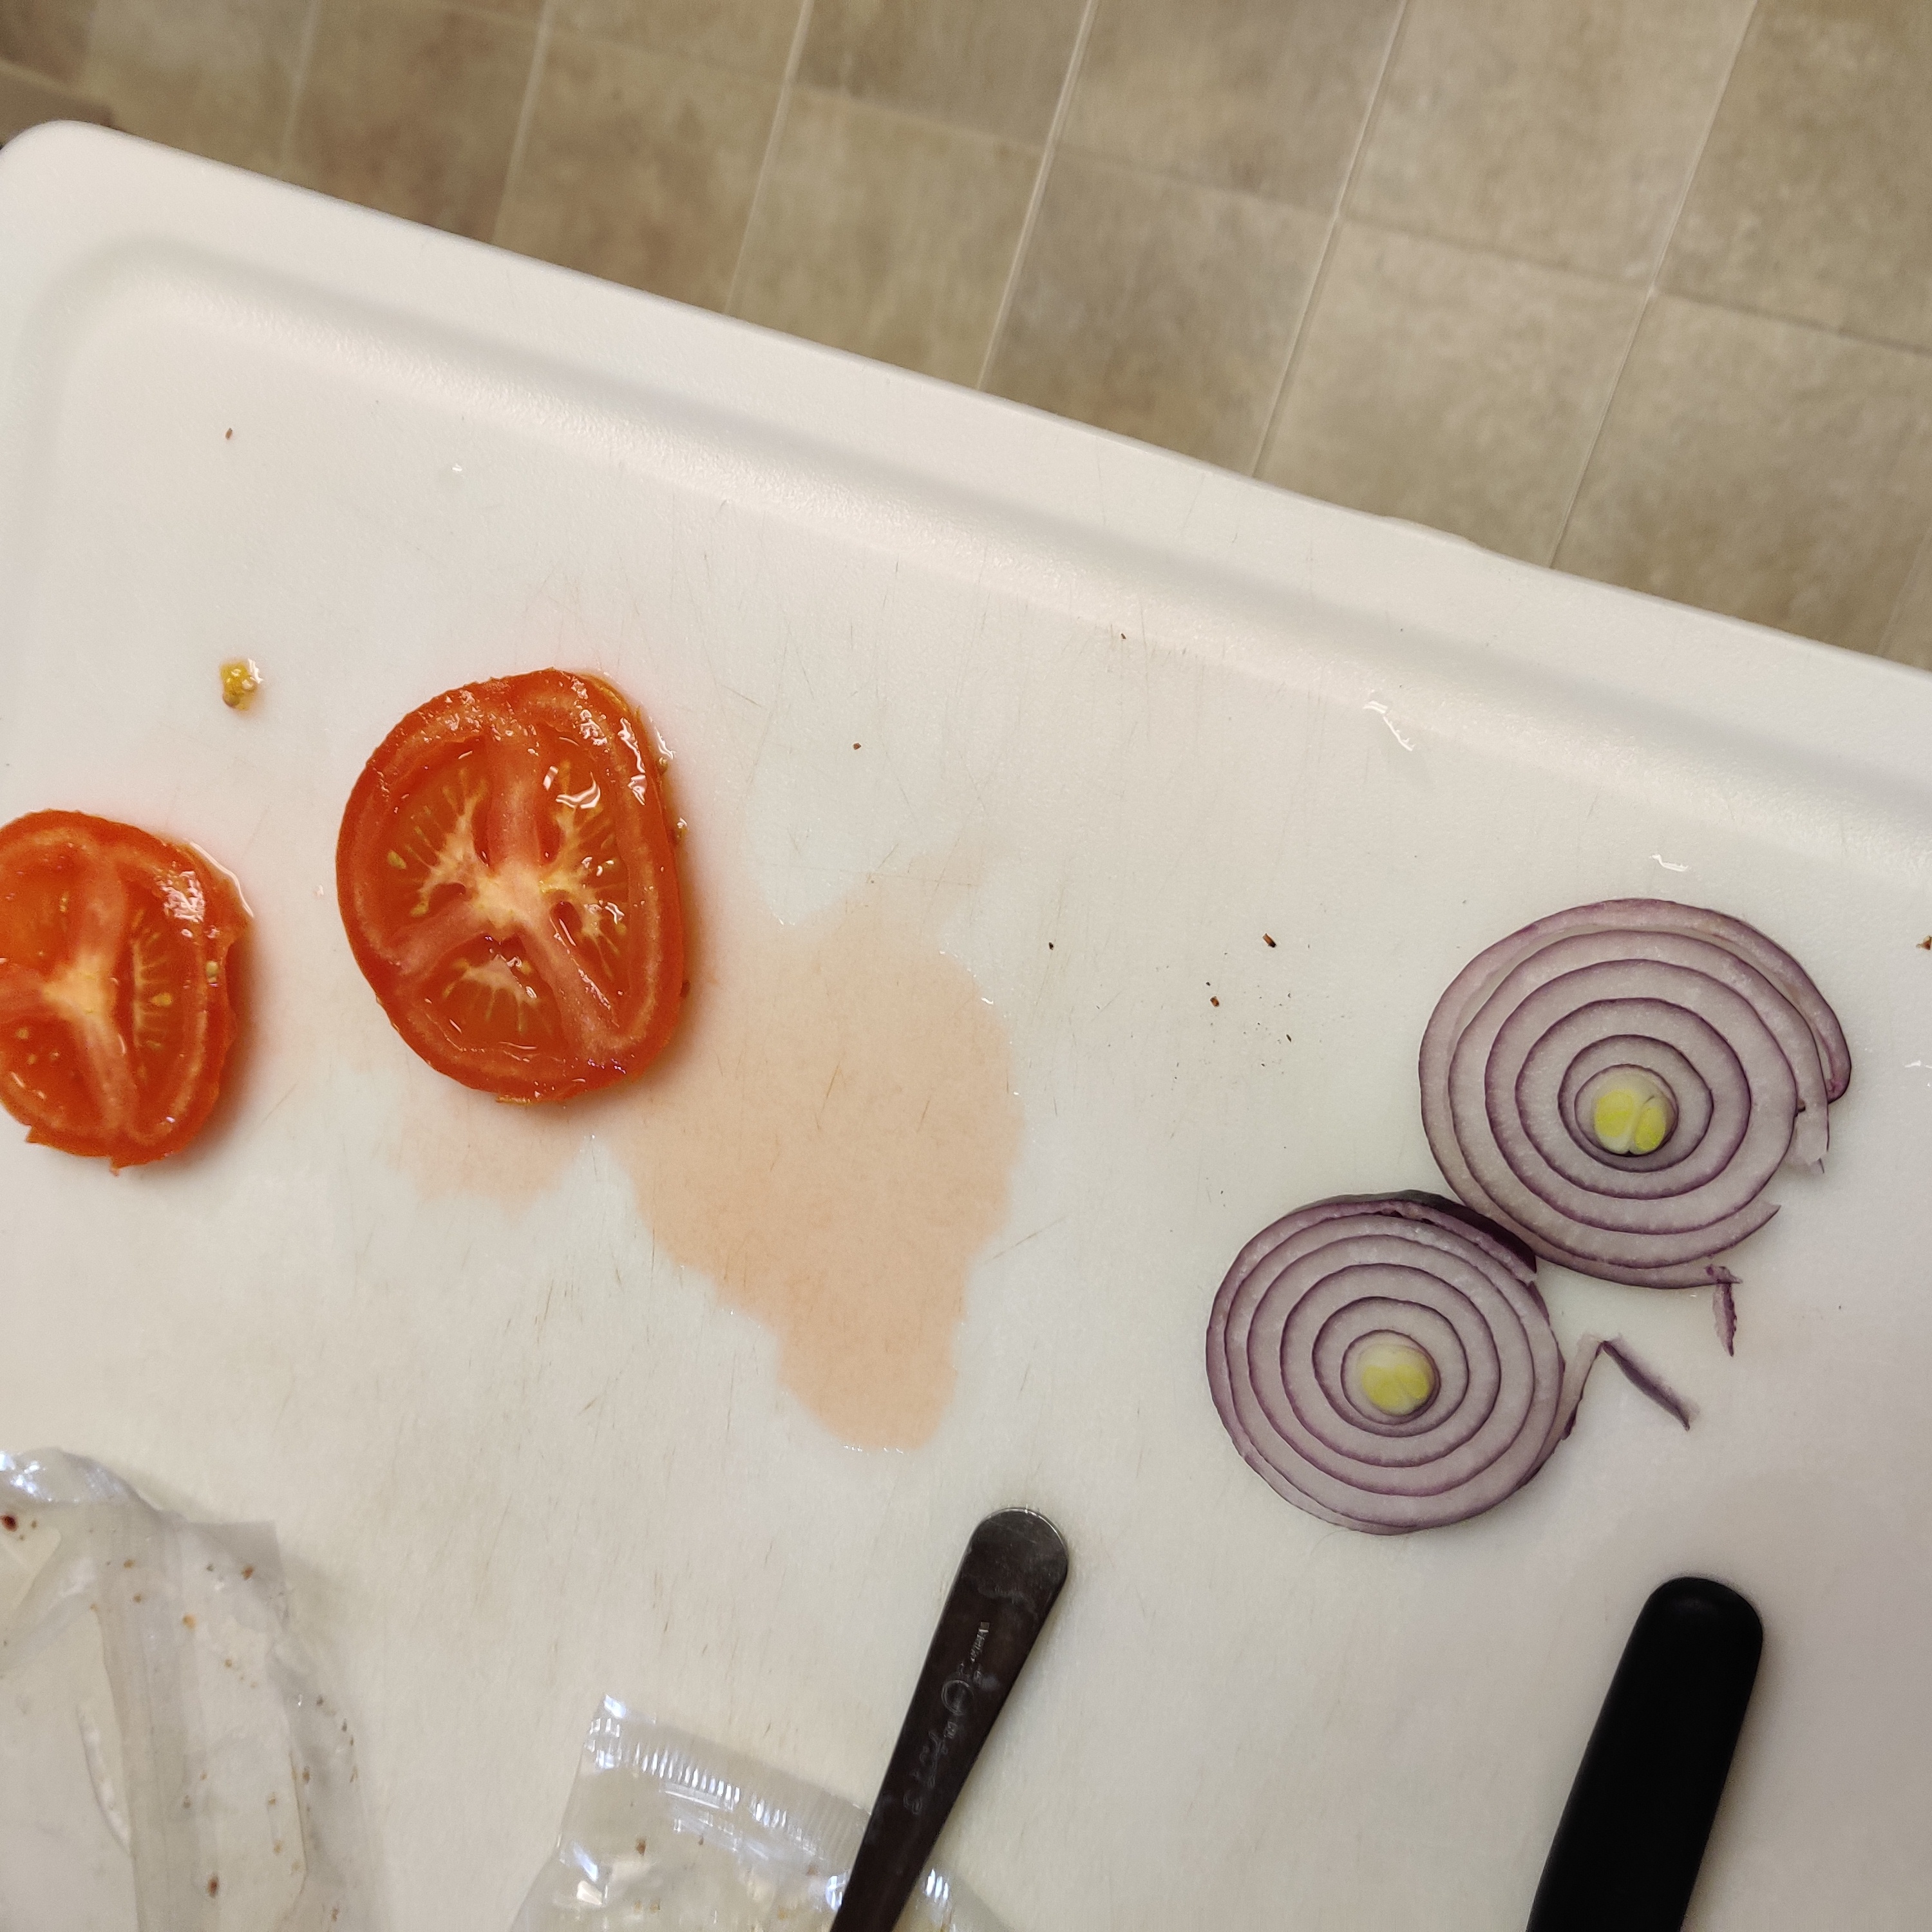 Image of tomato and onion slices